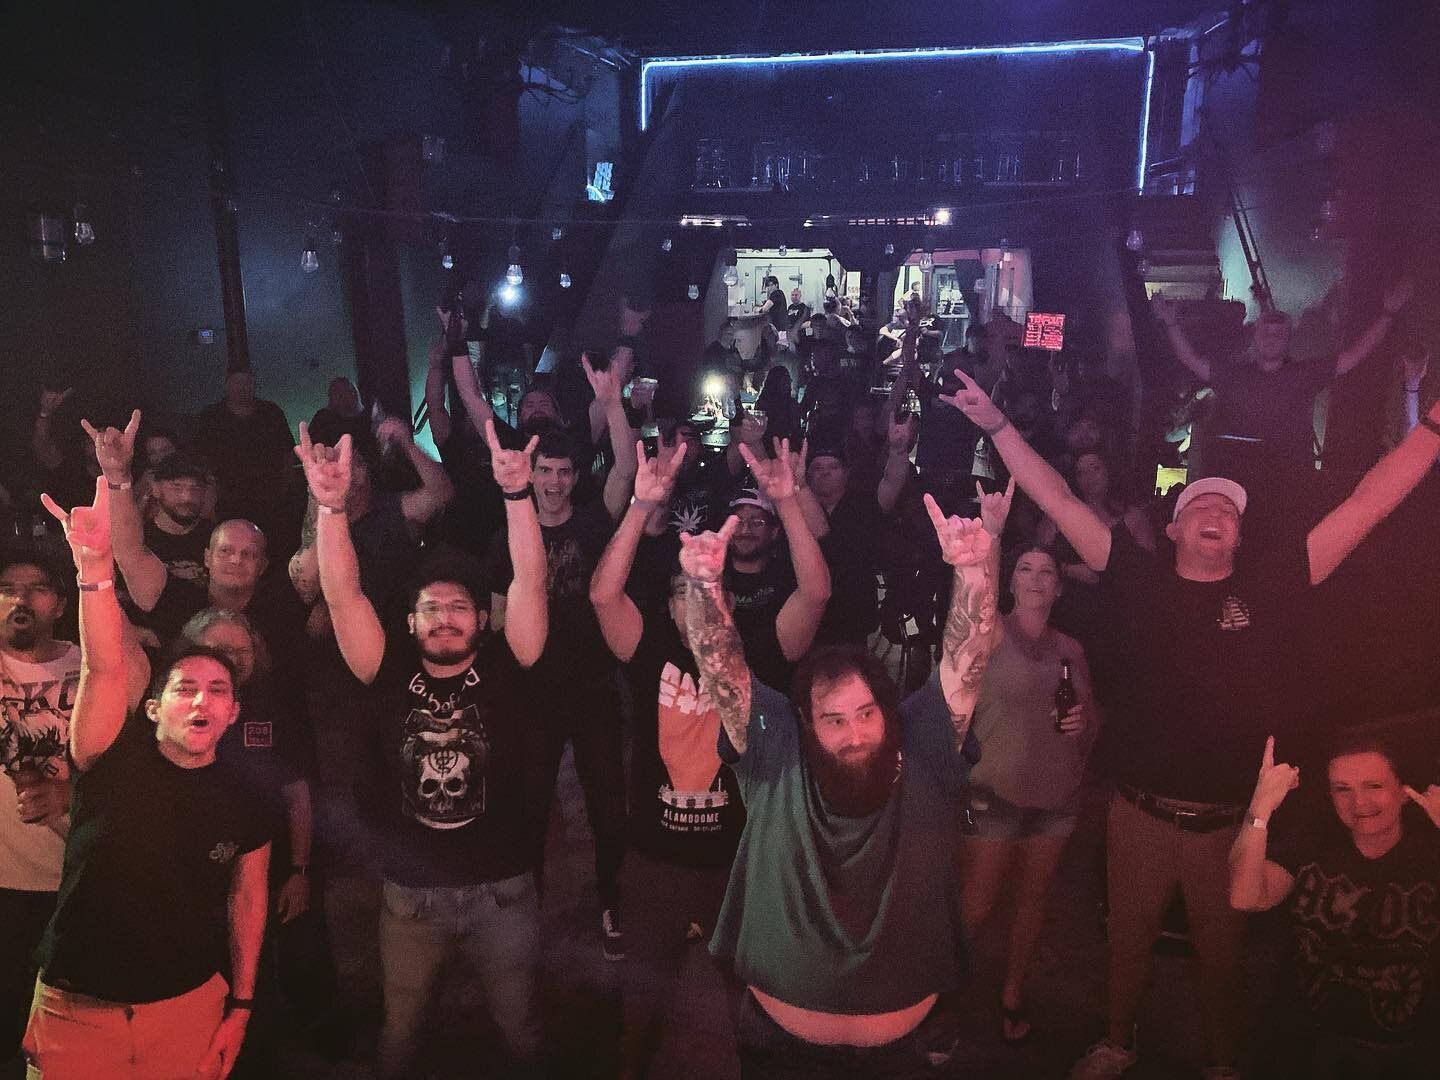 Thank you #bryancollegestation for showing up and supporting #texasmetal #livemusic at @thegrandstaffordtheater 🤘 

We had a blast performing with our friends and colleagues: #houstonmetal titans @tenfourmetal and southern-fried #austinrock king sna